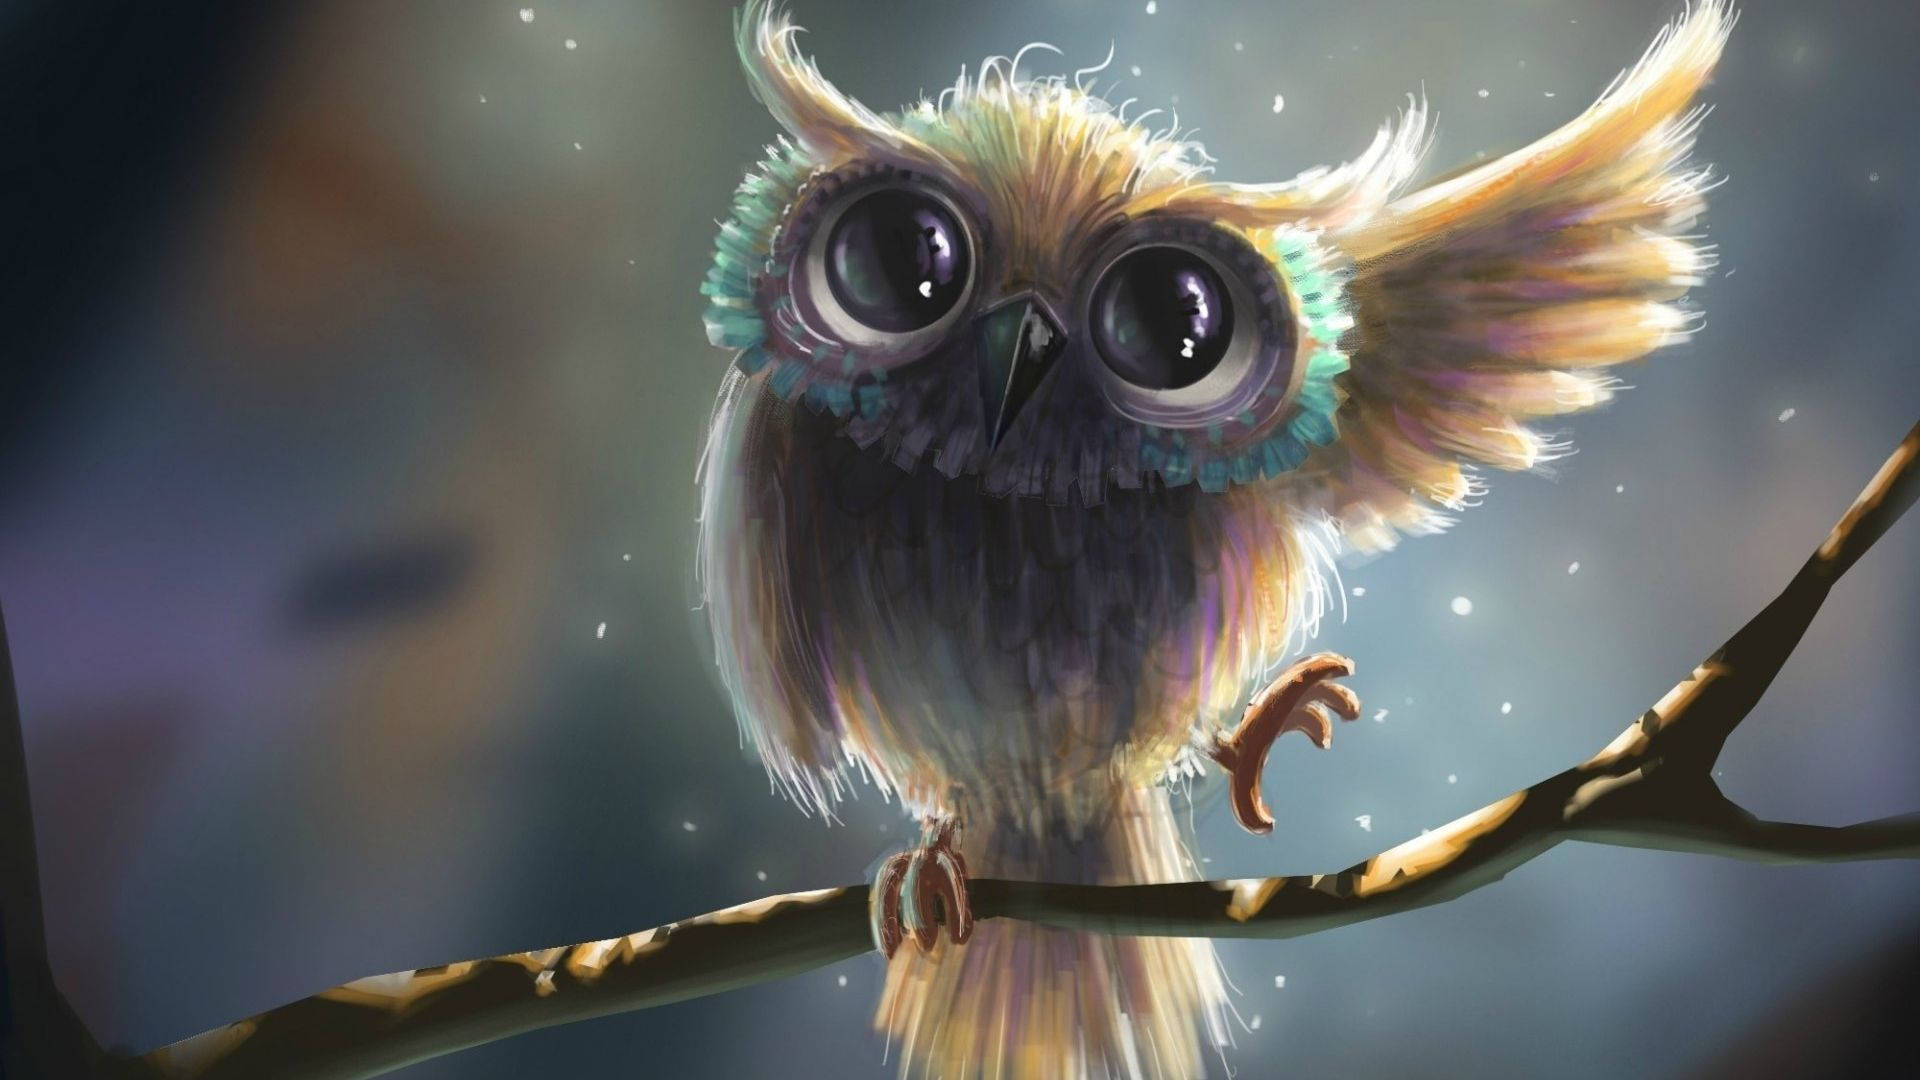 Free Baby Owl Wallpaper Downloads, [100+] Baby Owl Wallpapers for FREE |  